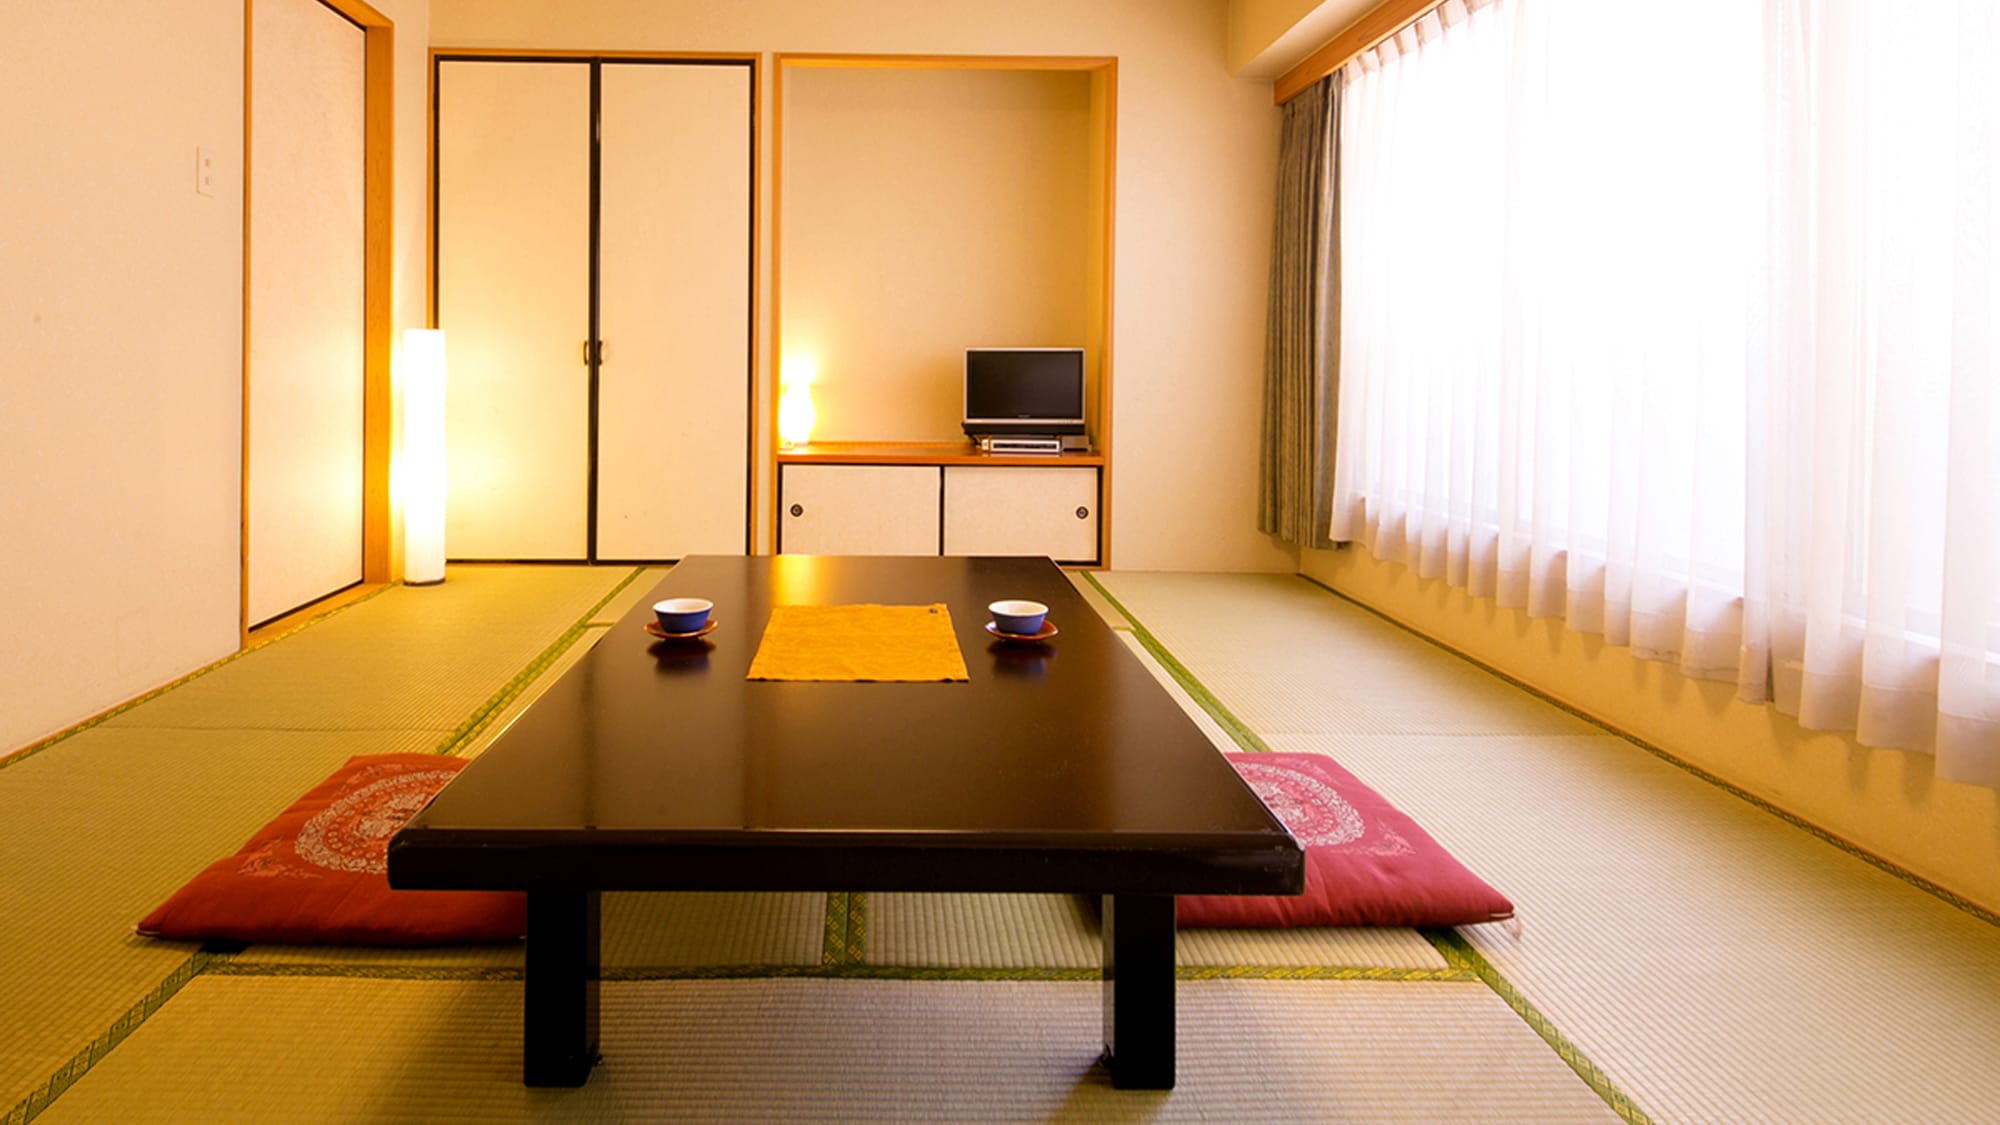 [Japanese-style room] A Japanese-style room of 10 tatami mats that can accommodate up to 5 people.